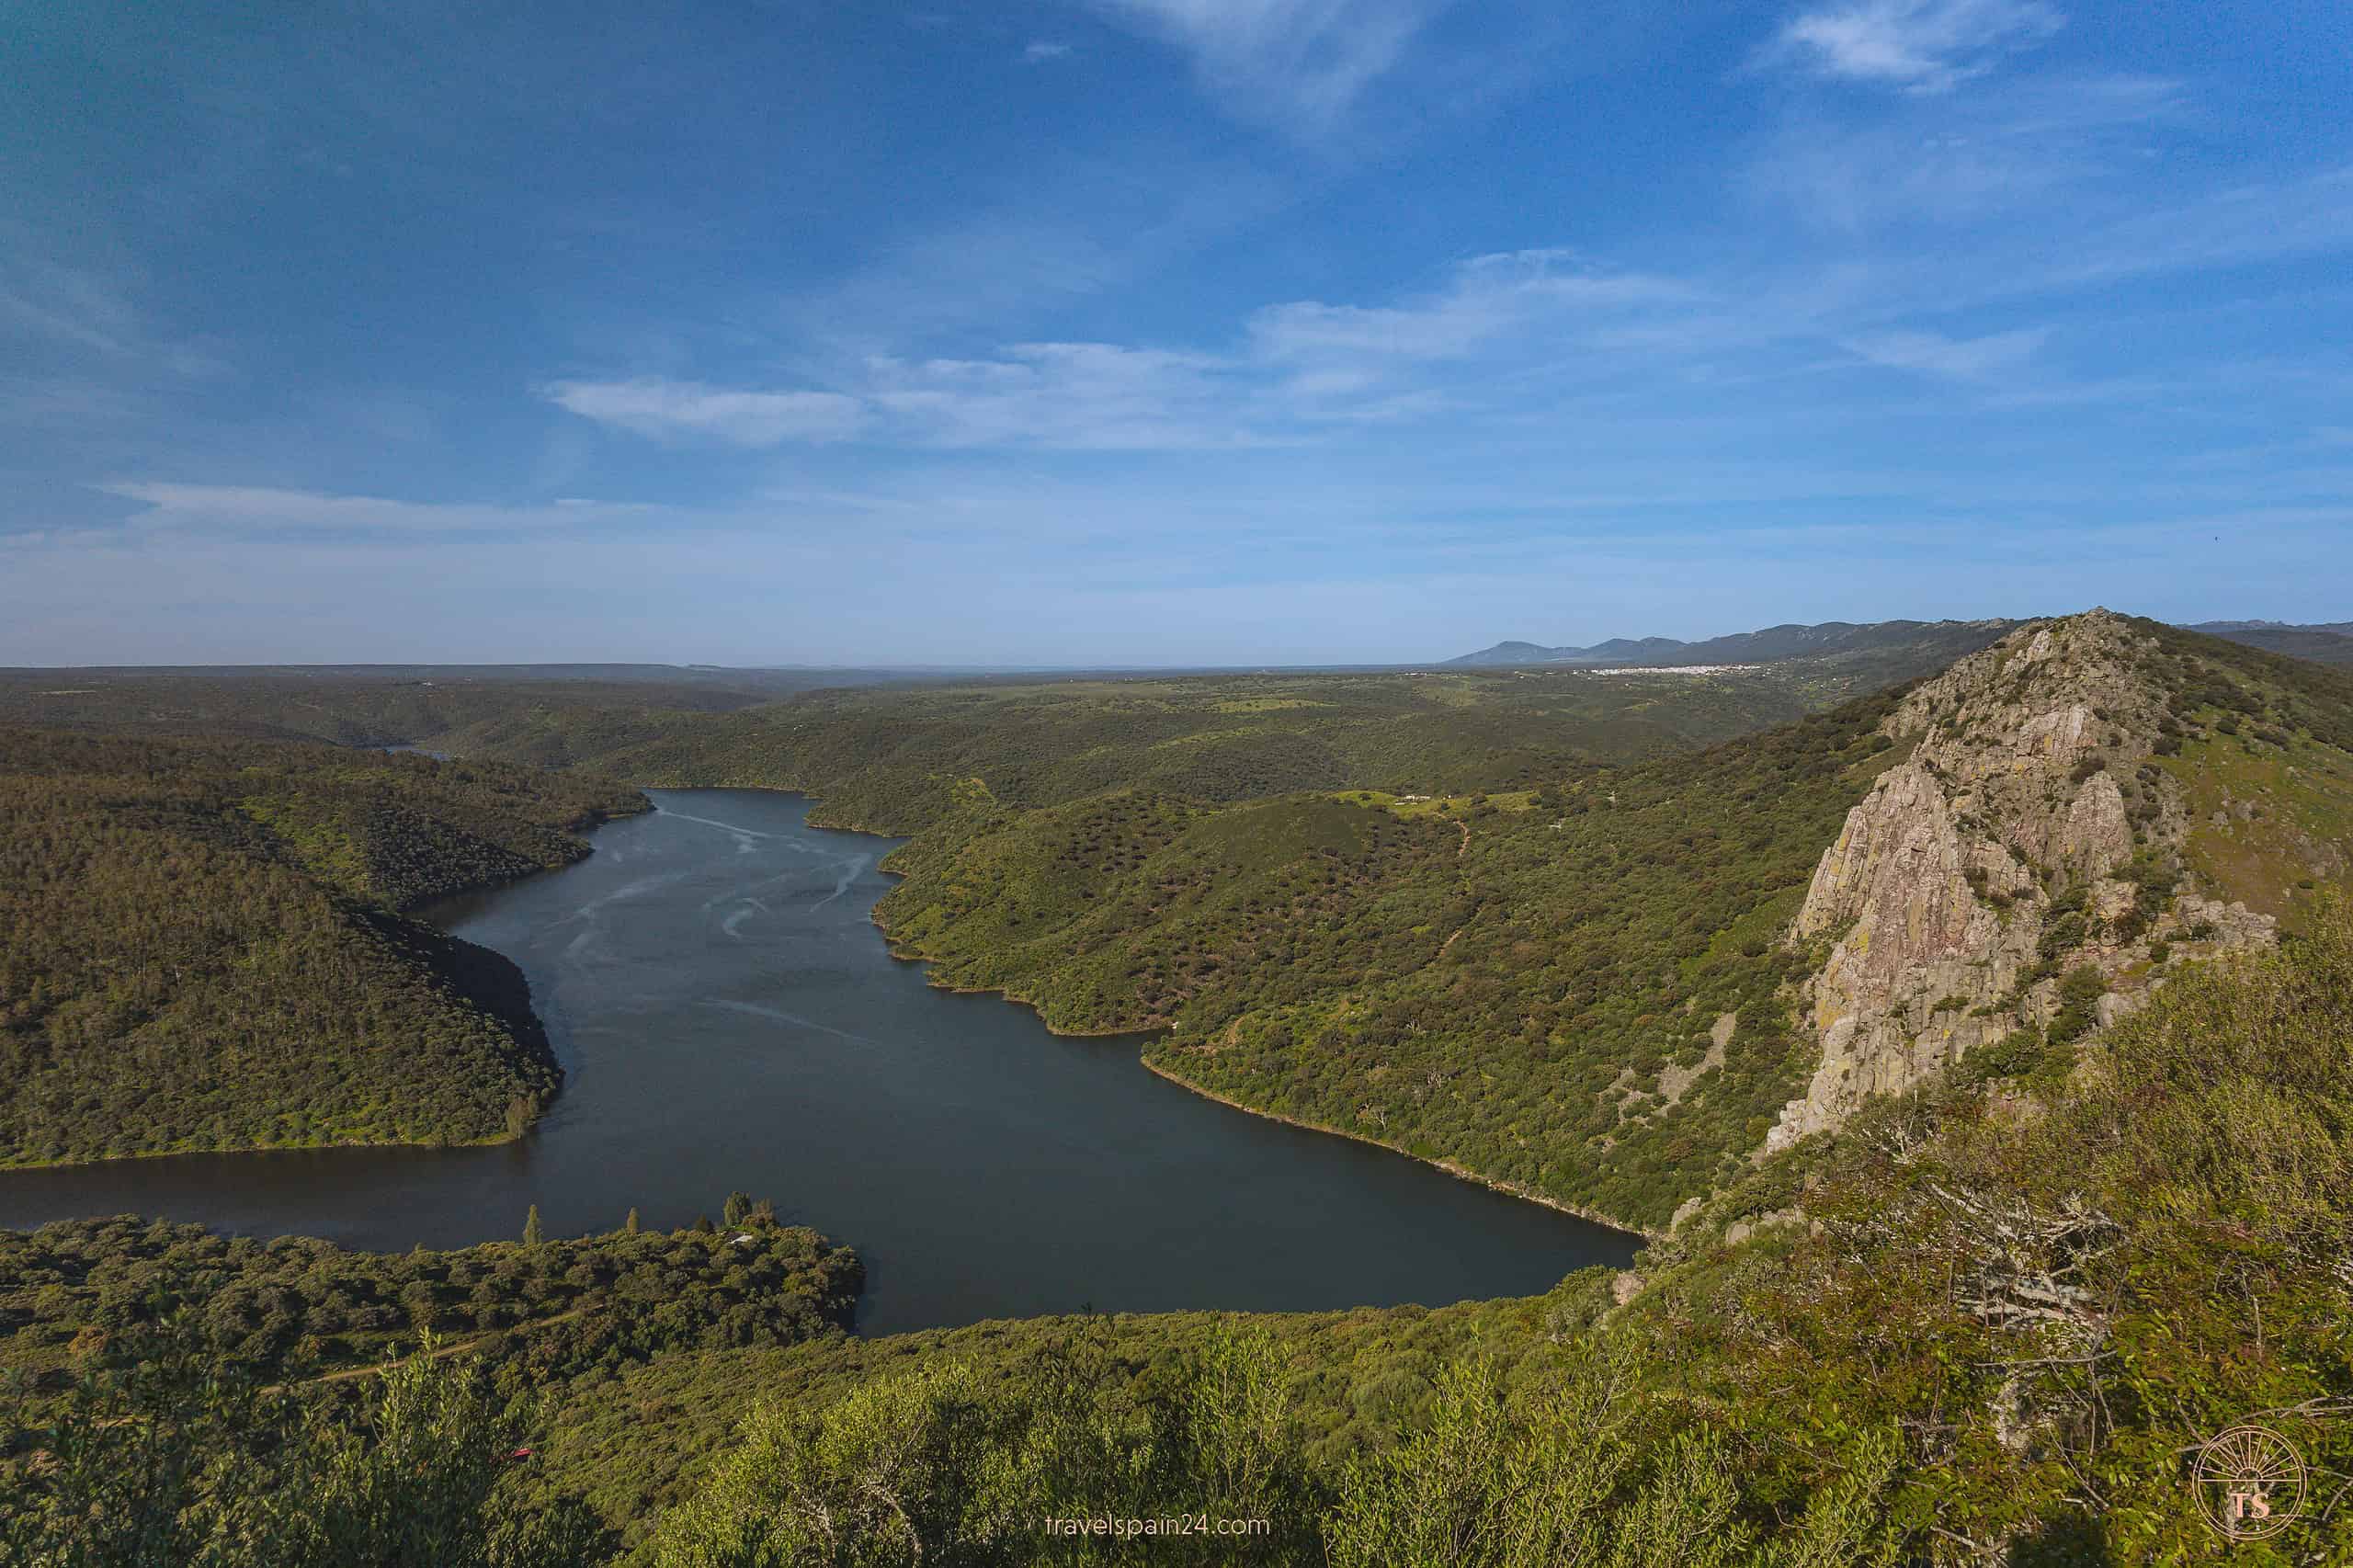 Morning view of Peña Falcón rock formation from the castle in Monfragüe National Park, featuring a clear blue sky and the river in the distance.